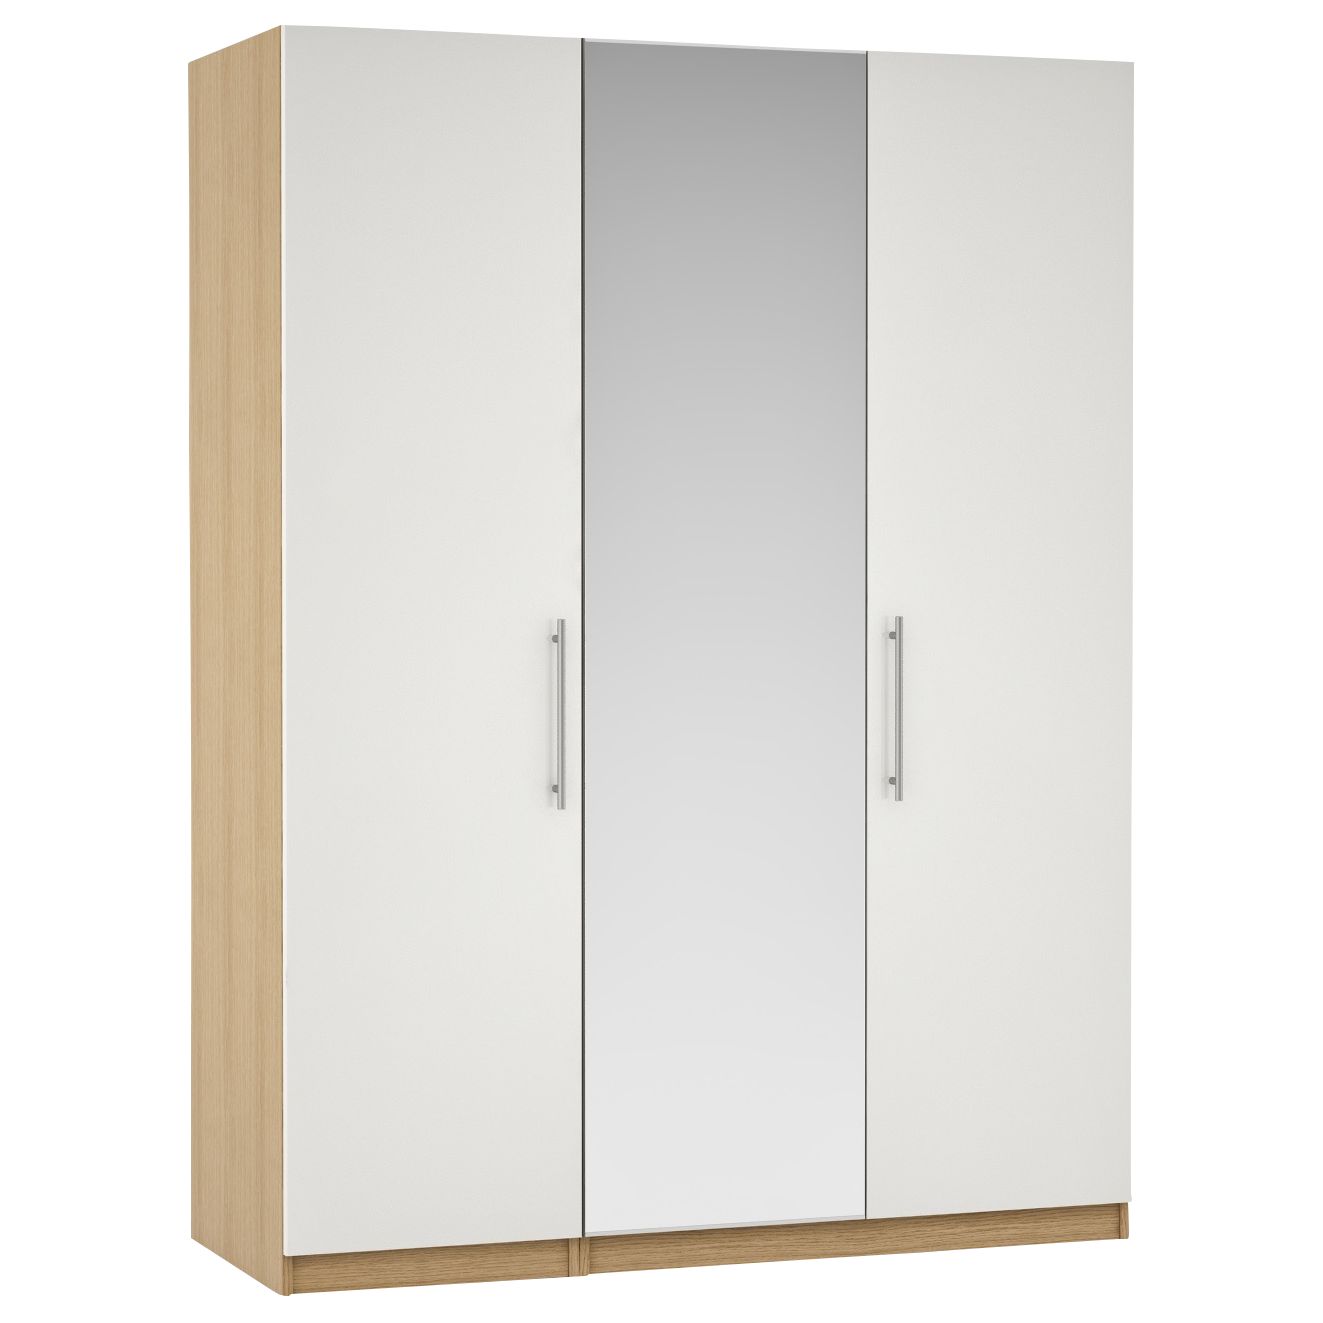 Photo of John lewis anyday mix it stainless steel long t-bar handle mirrored triple wardrobe with internal drawers/shelving gloss white slab/natural oak